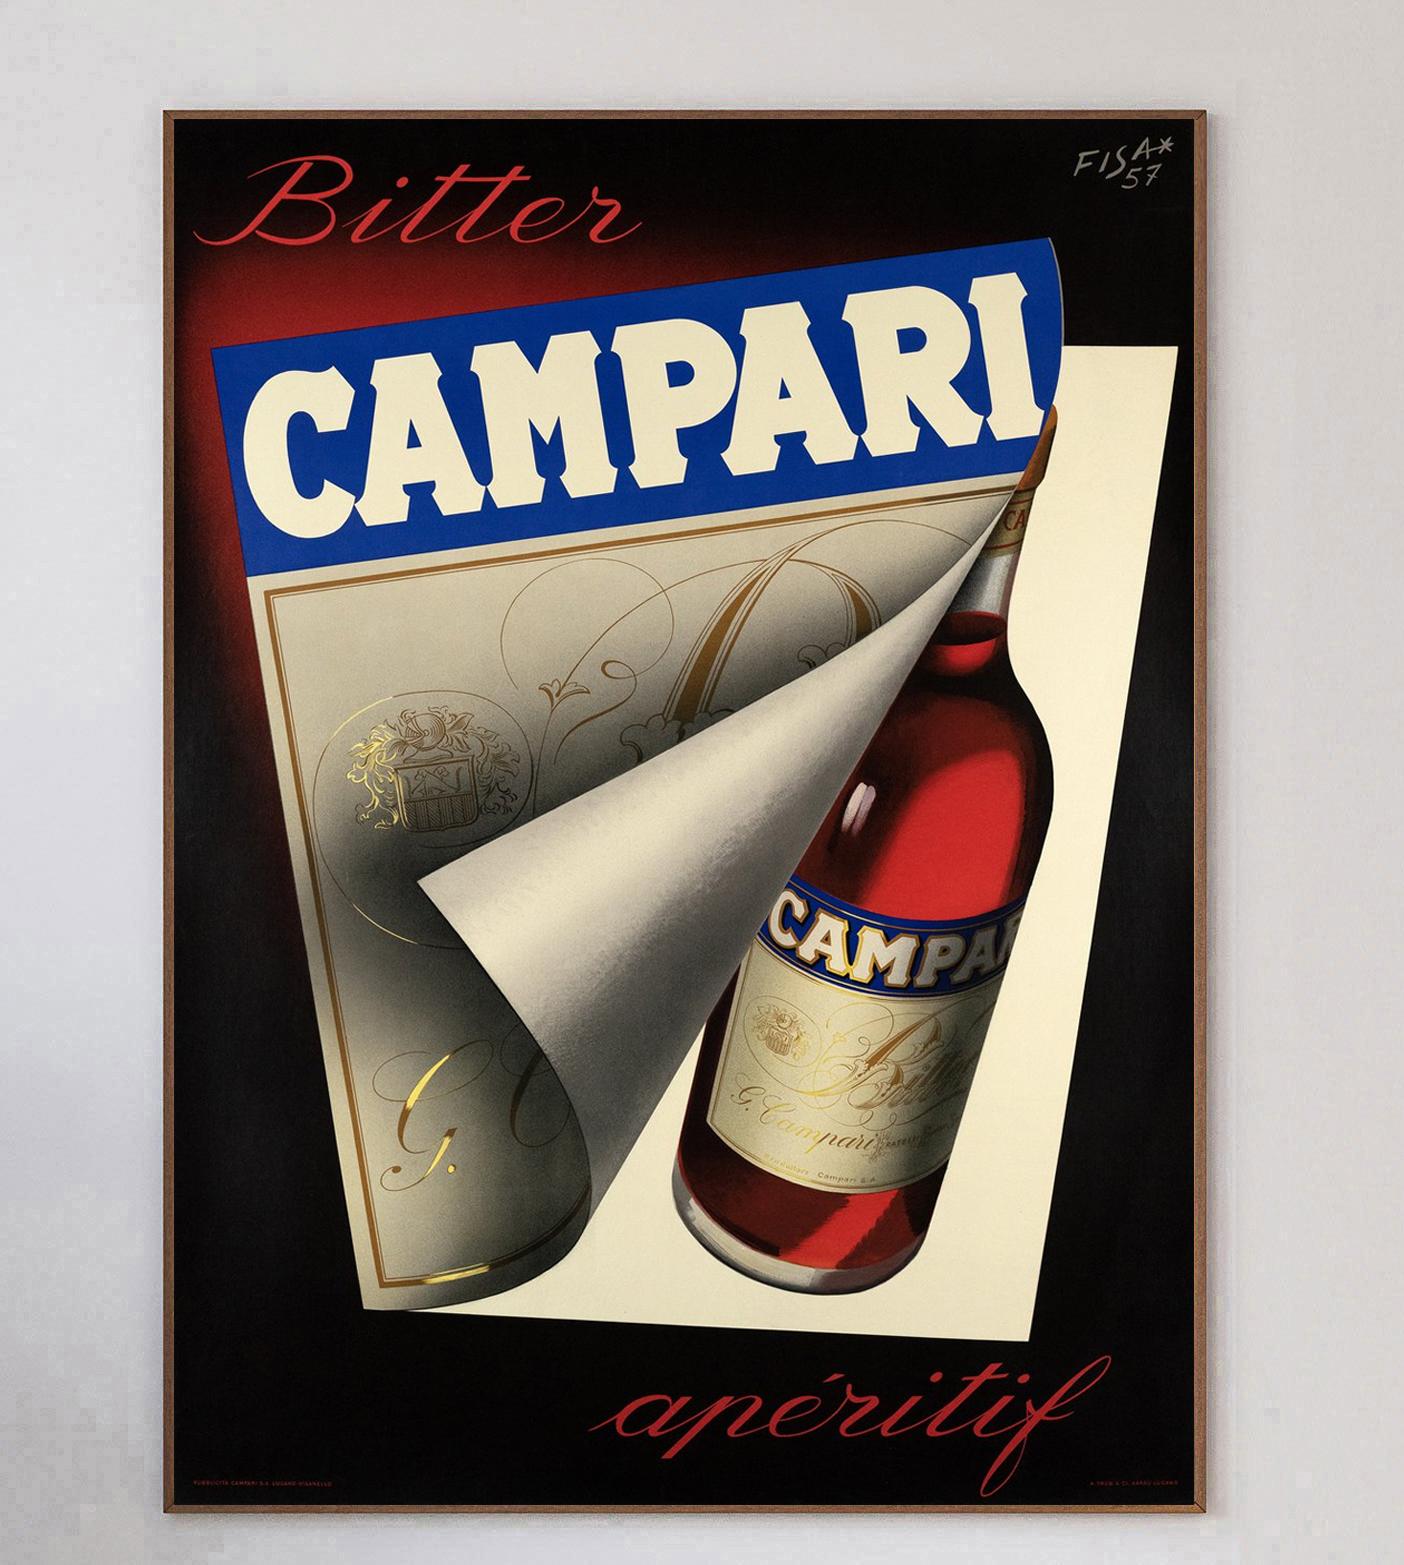 Campari was formed in 1860 by Gaspare Campari and the aperitif is as popular today as ever. His son, Davide Campari transformed the company in 1926 into what it is widely known for today. This gorgeous lithographic poster was created in 1957 with